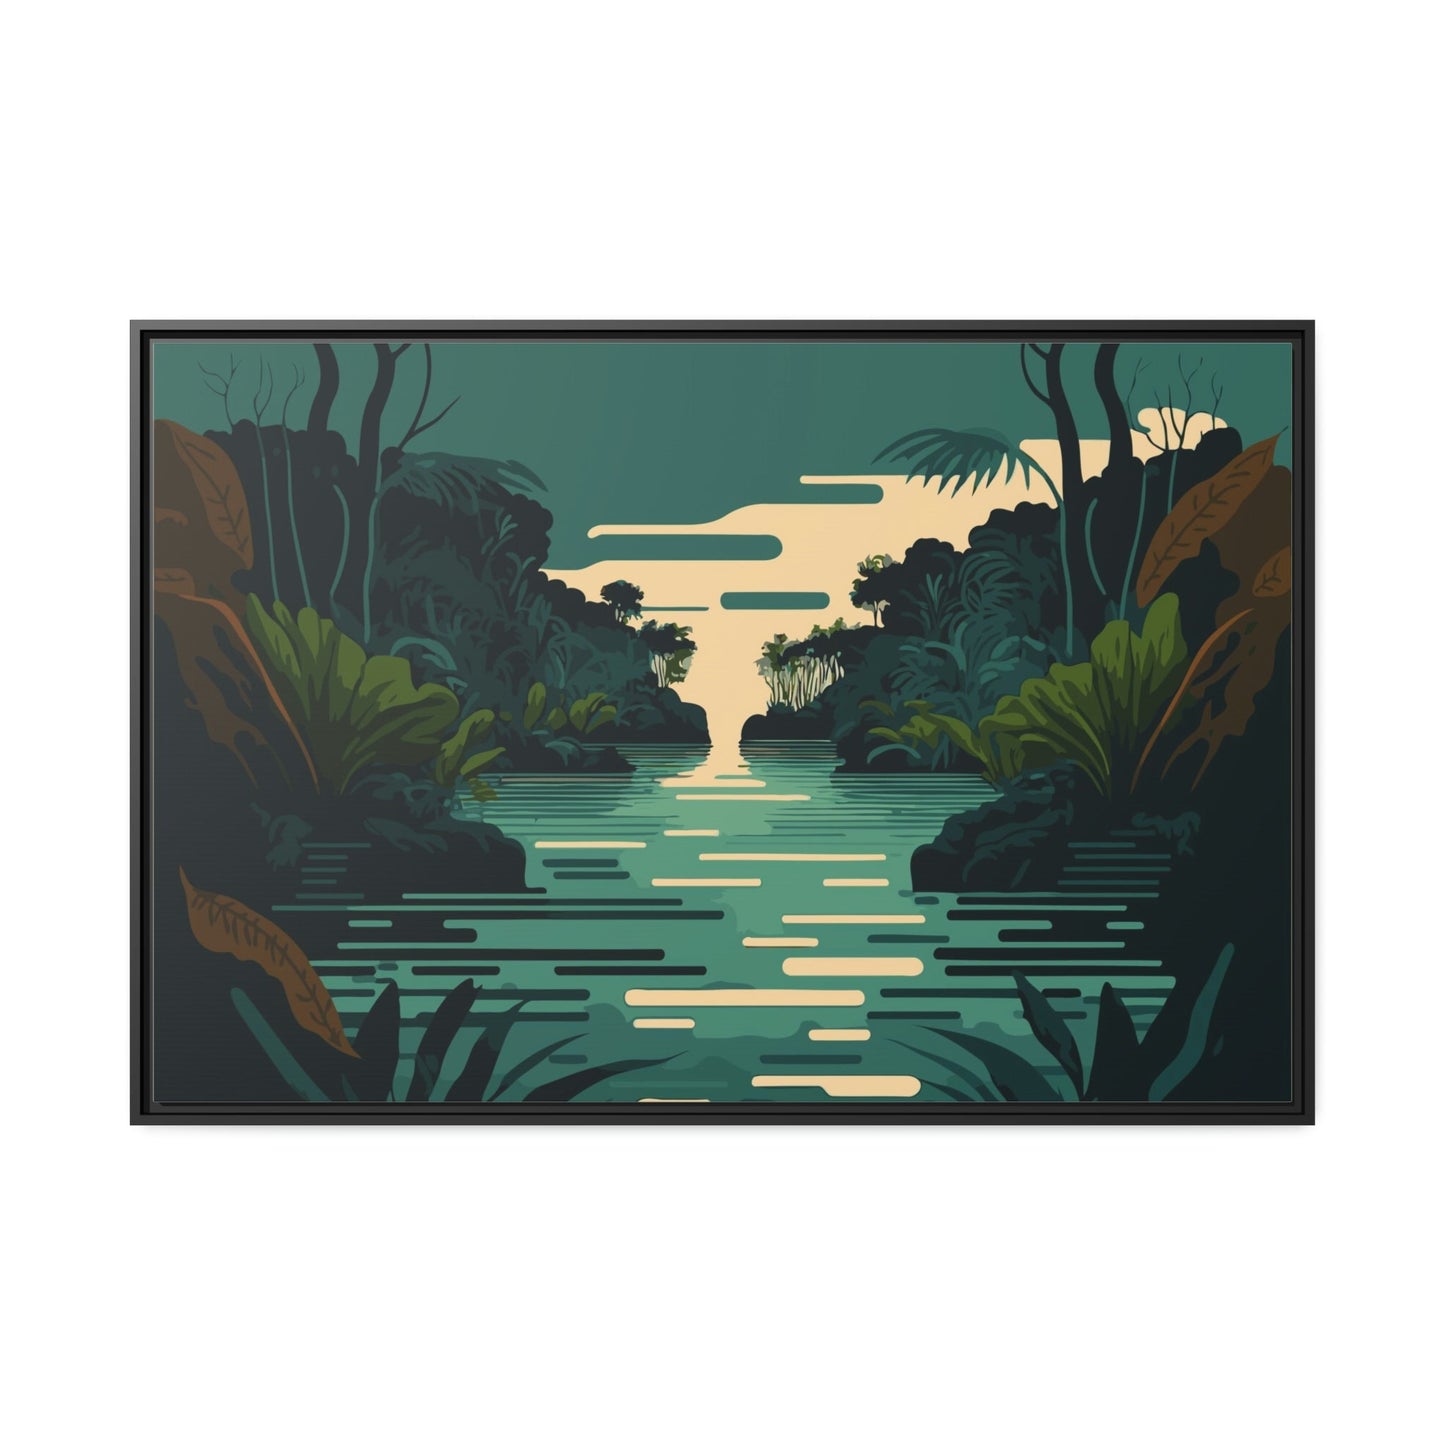 Tranquil Waterside: Wall Art of a Picturesque Lakeside on Natural Canvas